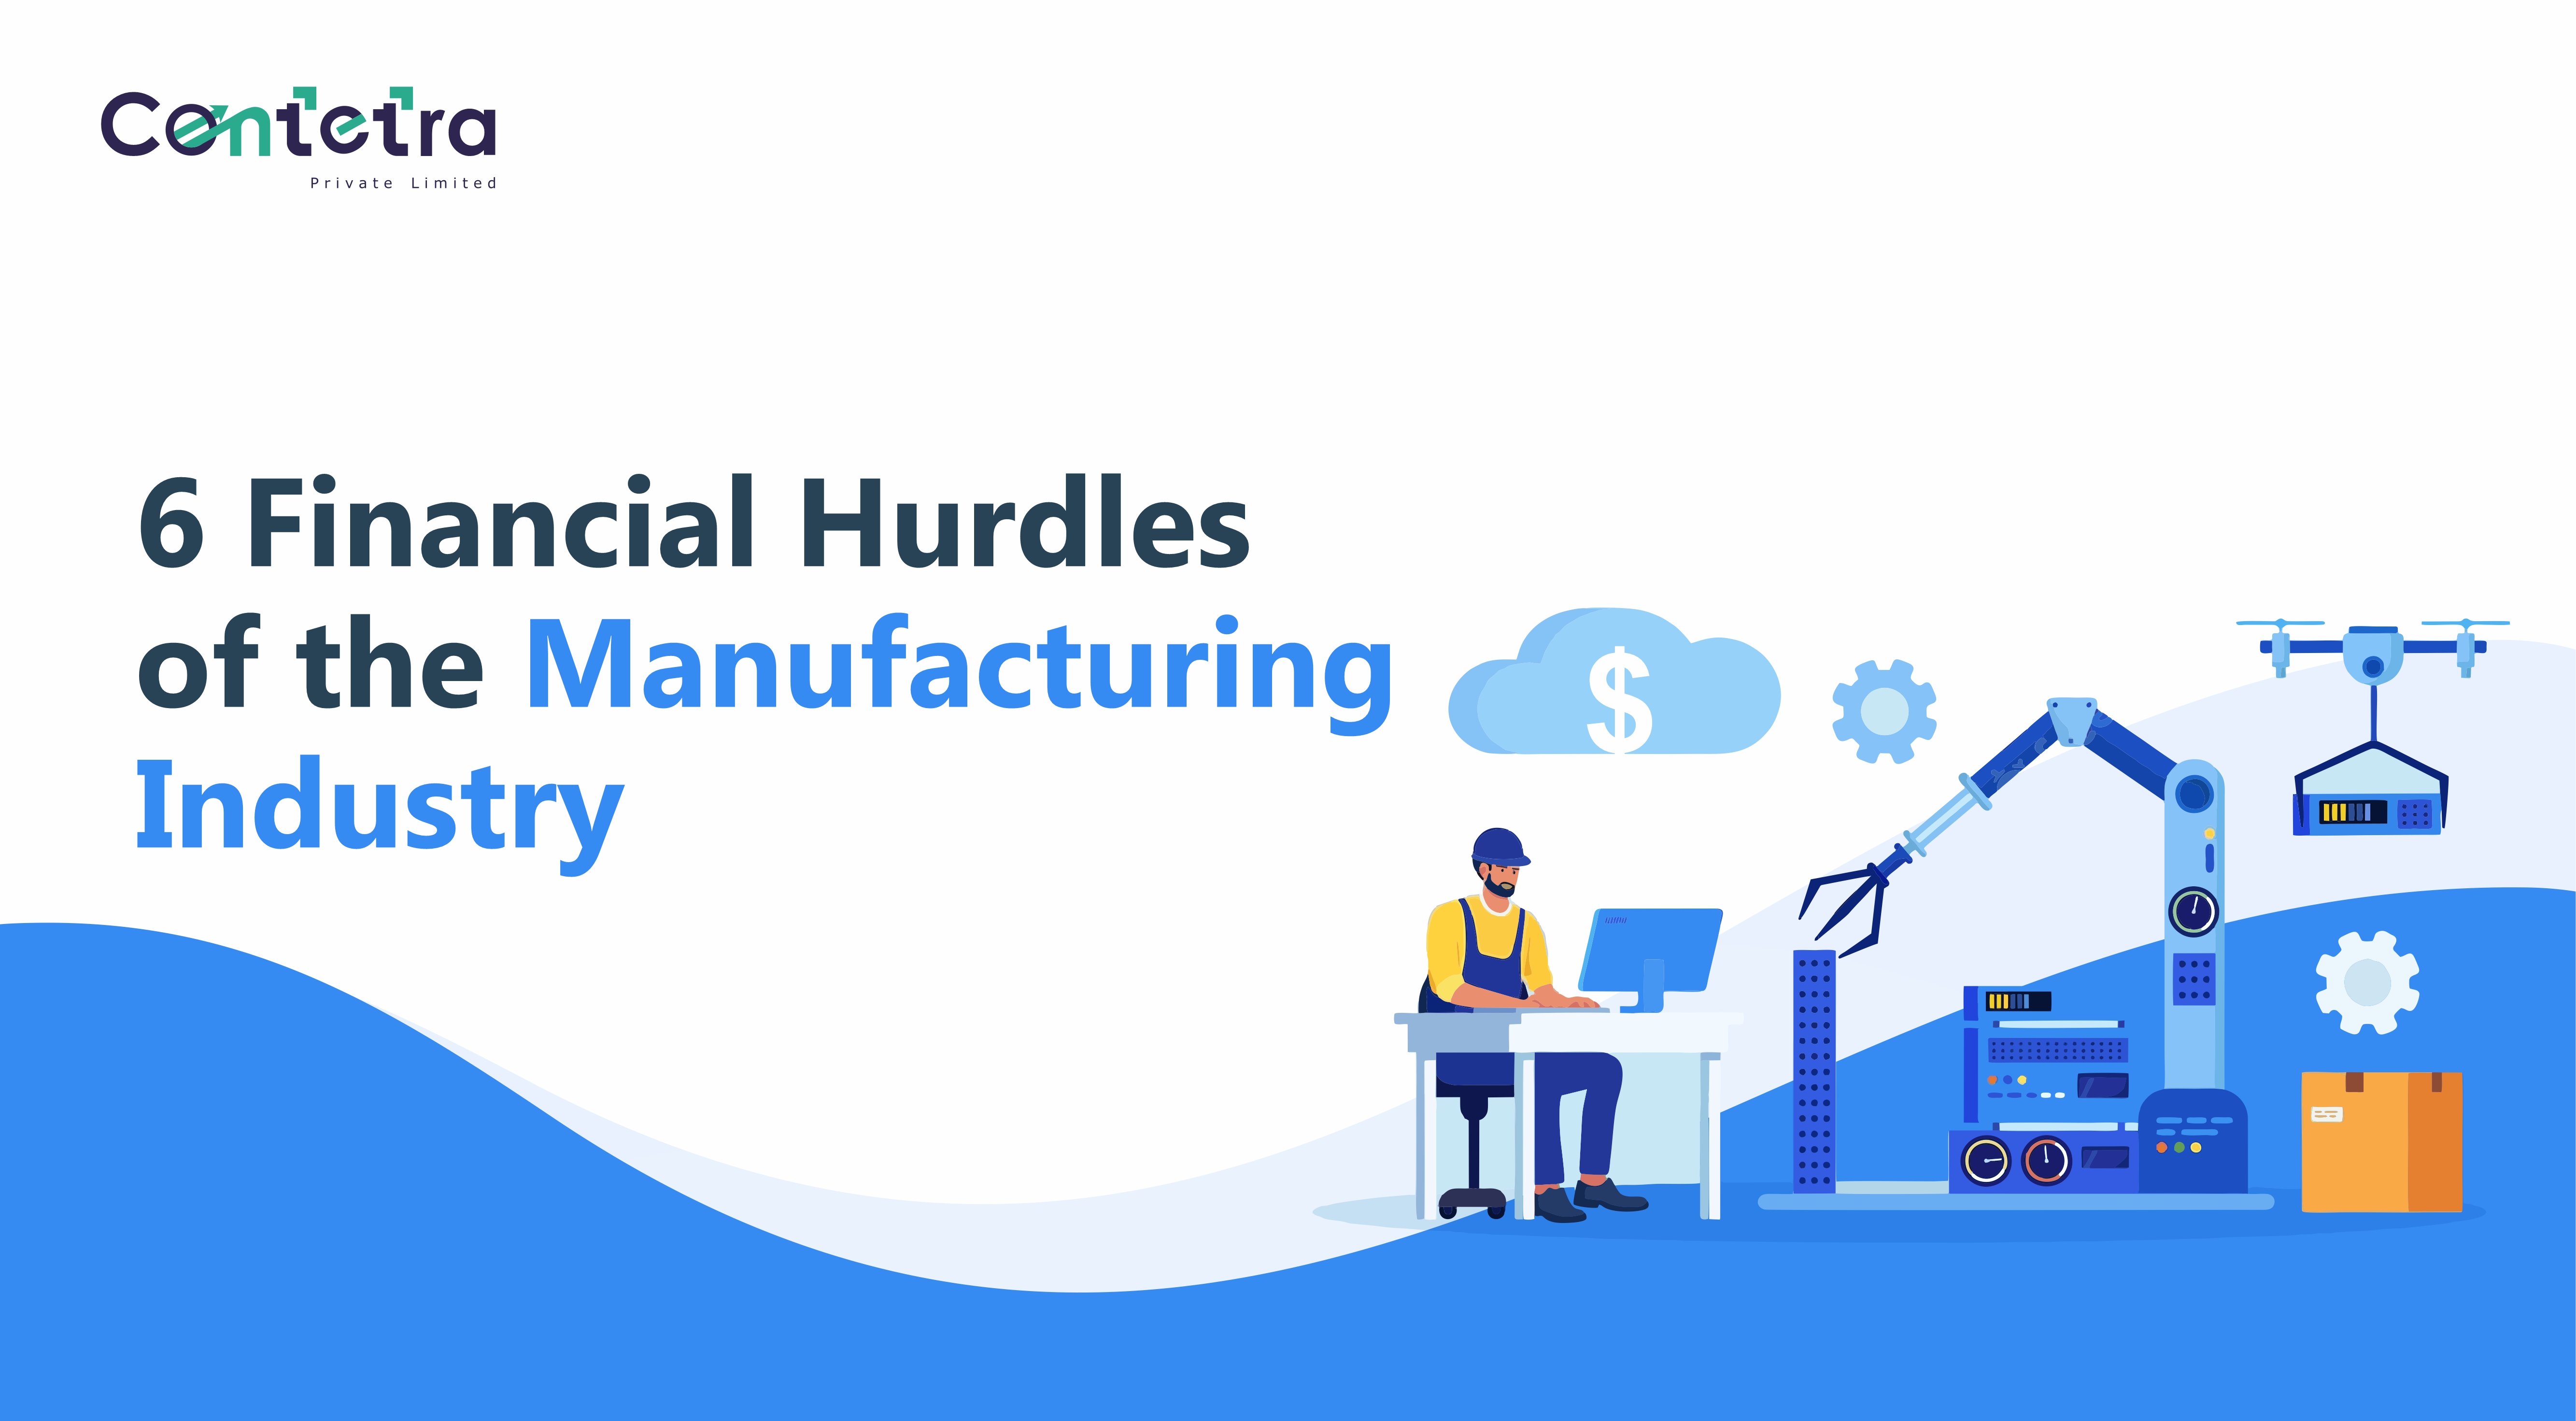 6 Financial Hurdles of the Manufacturing Industry